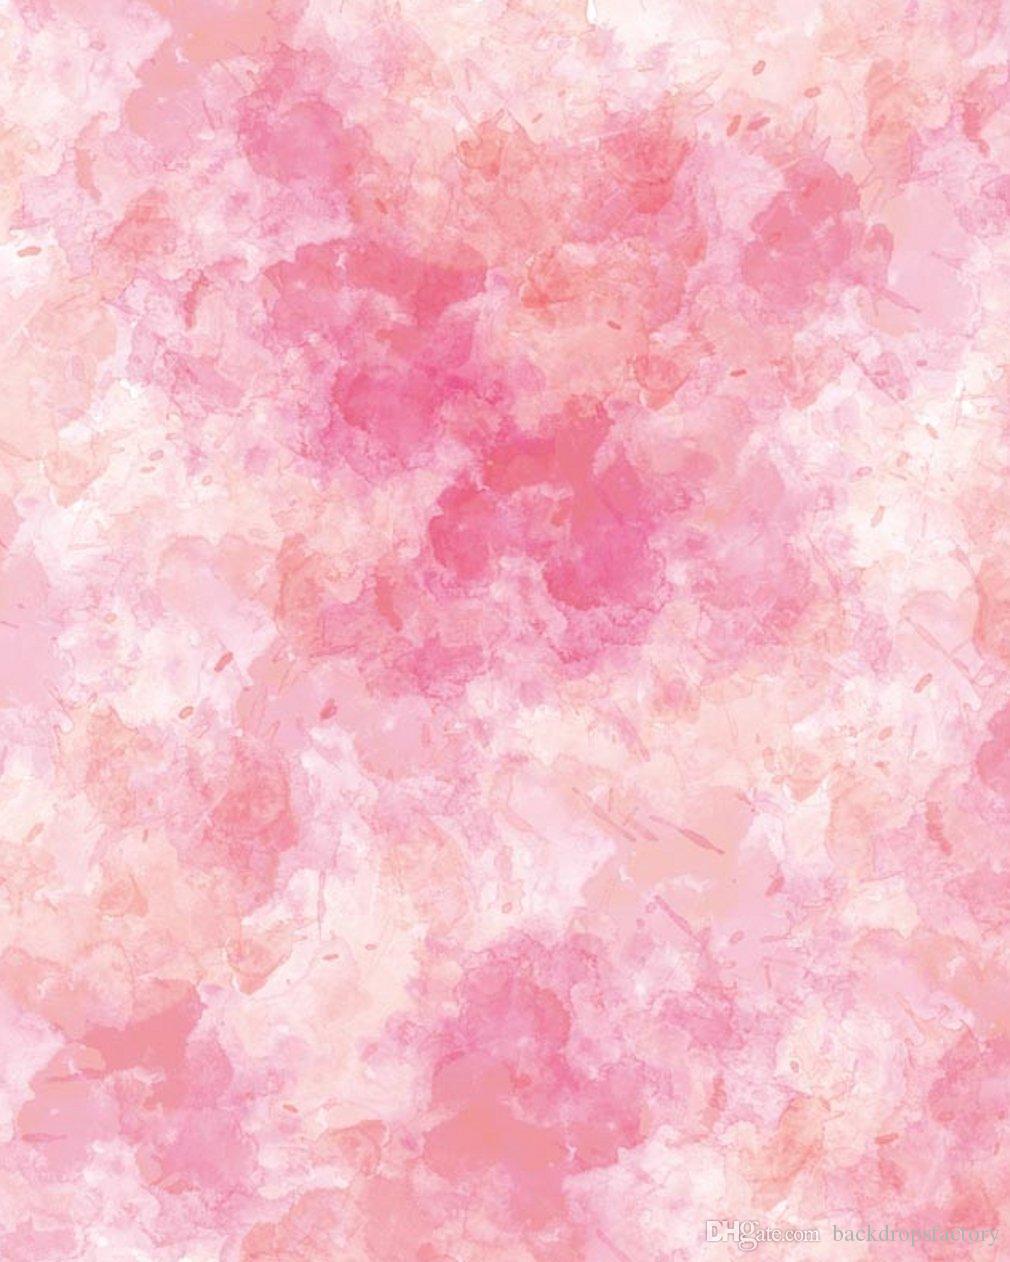 Wholesale Background Material At $21. Get Abstract Pink Watercolor Photo Background For Studio Printed Blurry Photography Backdrops Baby Newborn Booth Wallpaper Props From Backdropsfactory Online Store